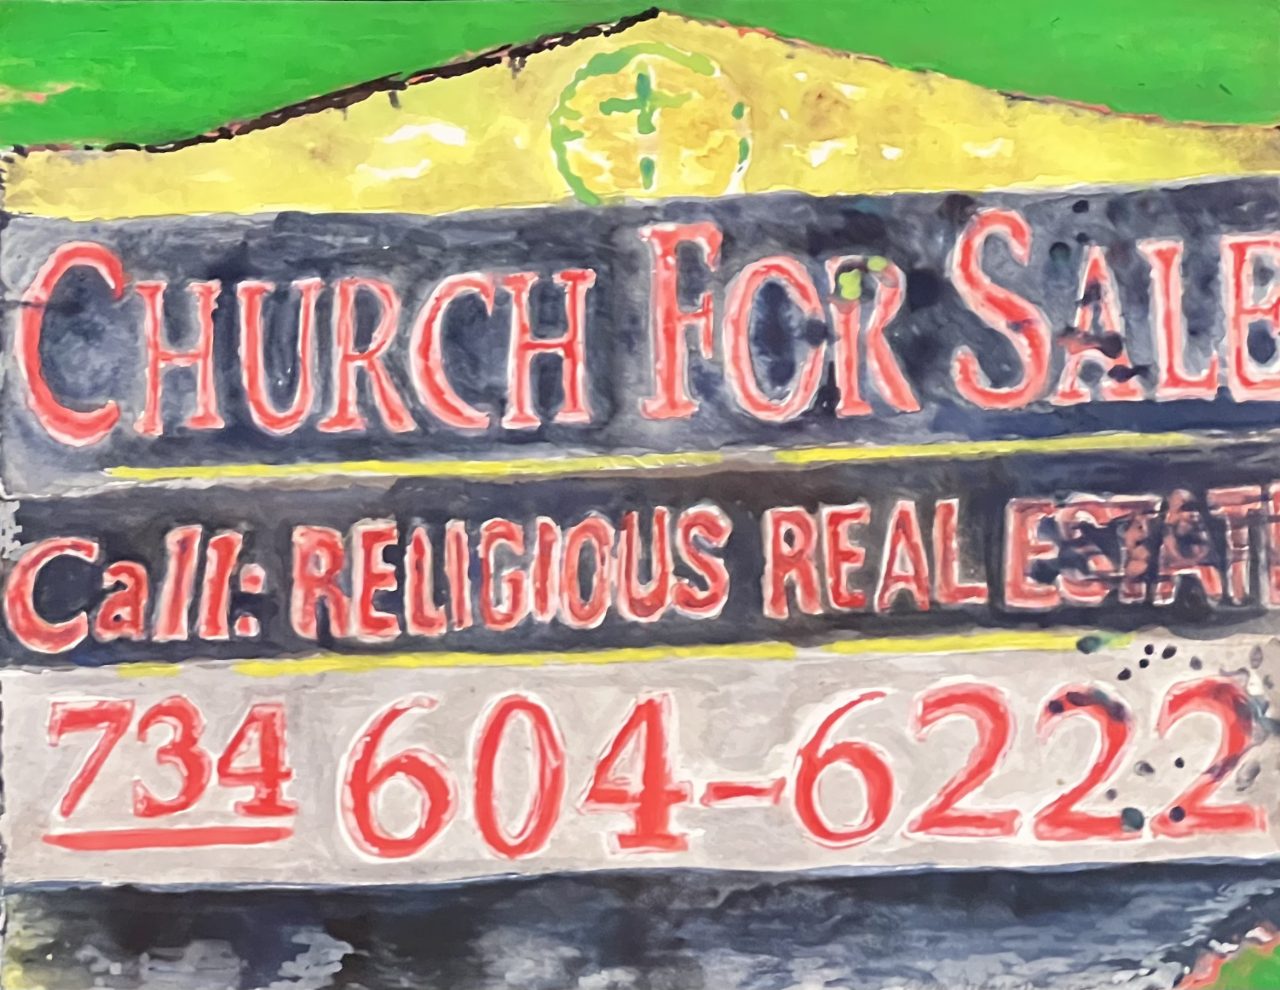 Church for Sale, installation view